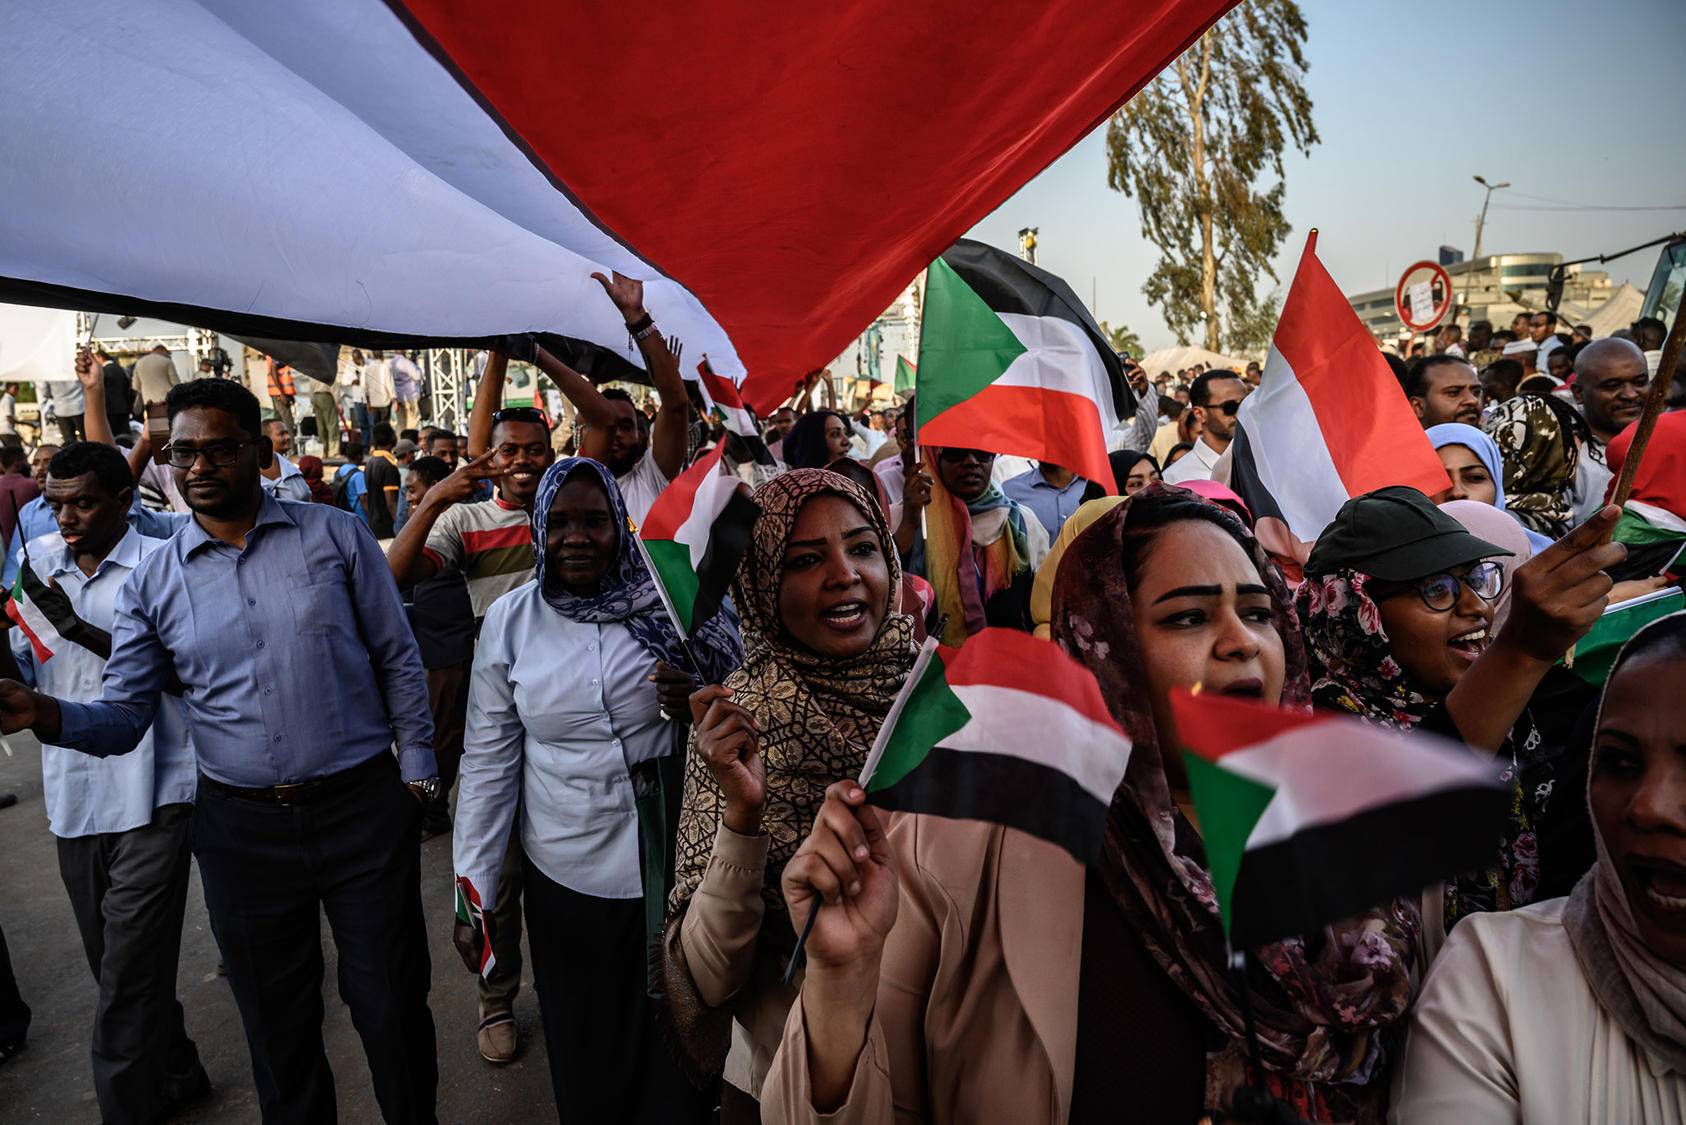 Sudanese demonstrators march during anti-government protests in Khartoum on April 22, 2019. (Photo by Bryan Denton/New York Times)